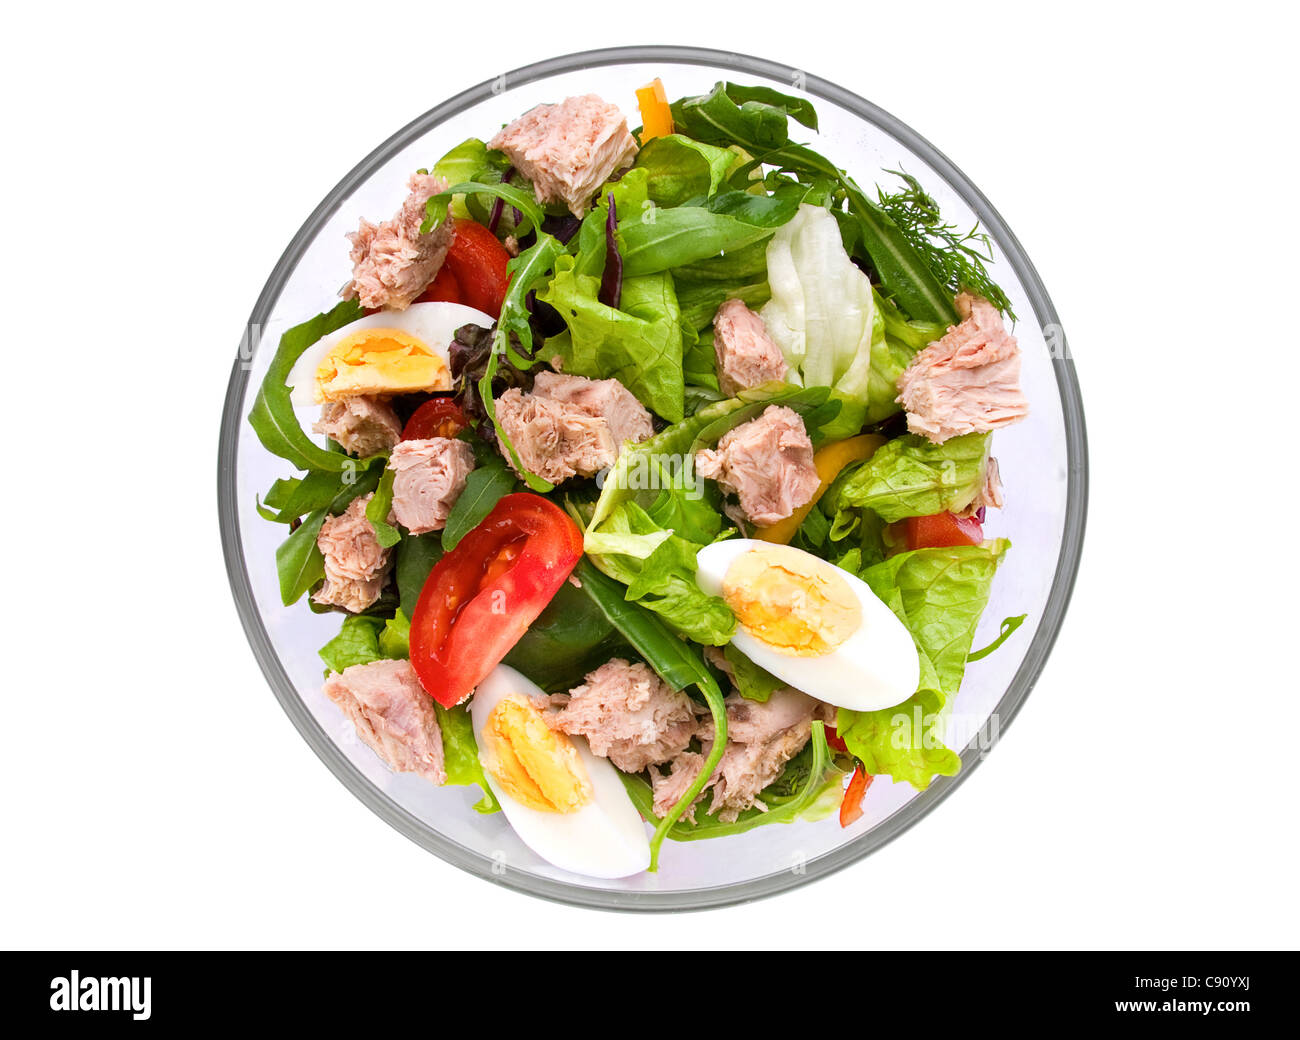 Salad with tuna fish boiled egg and vrgrtable on white Stock Photo